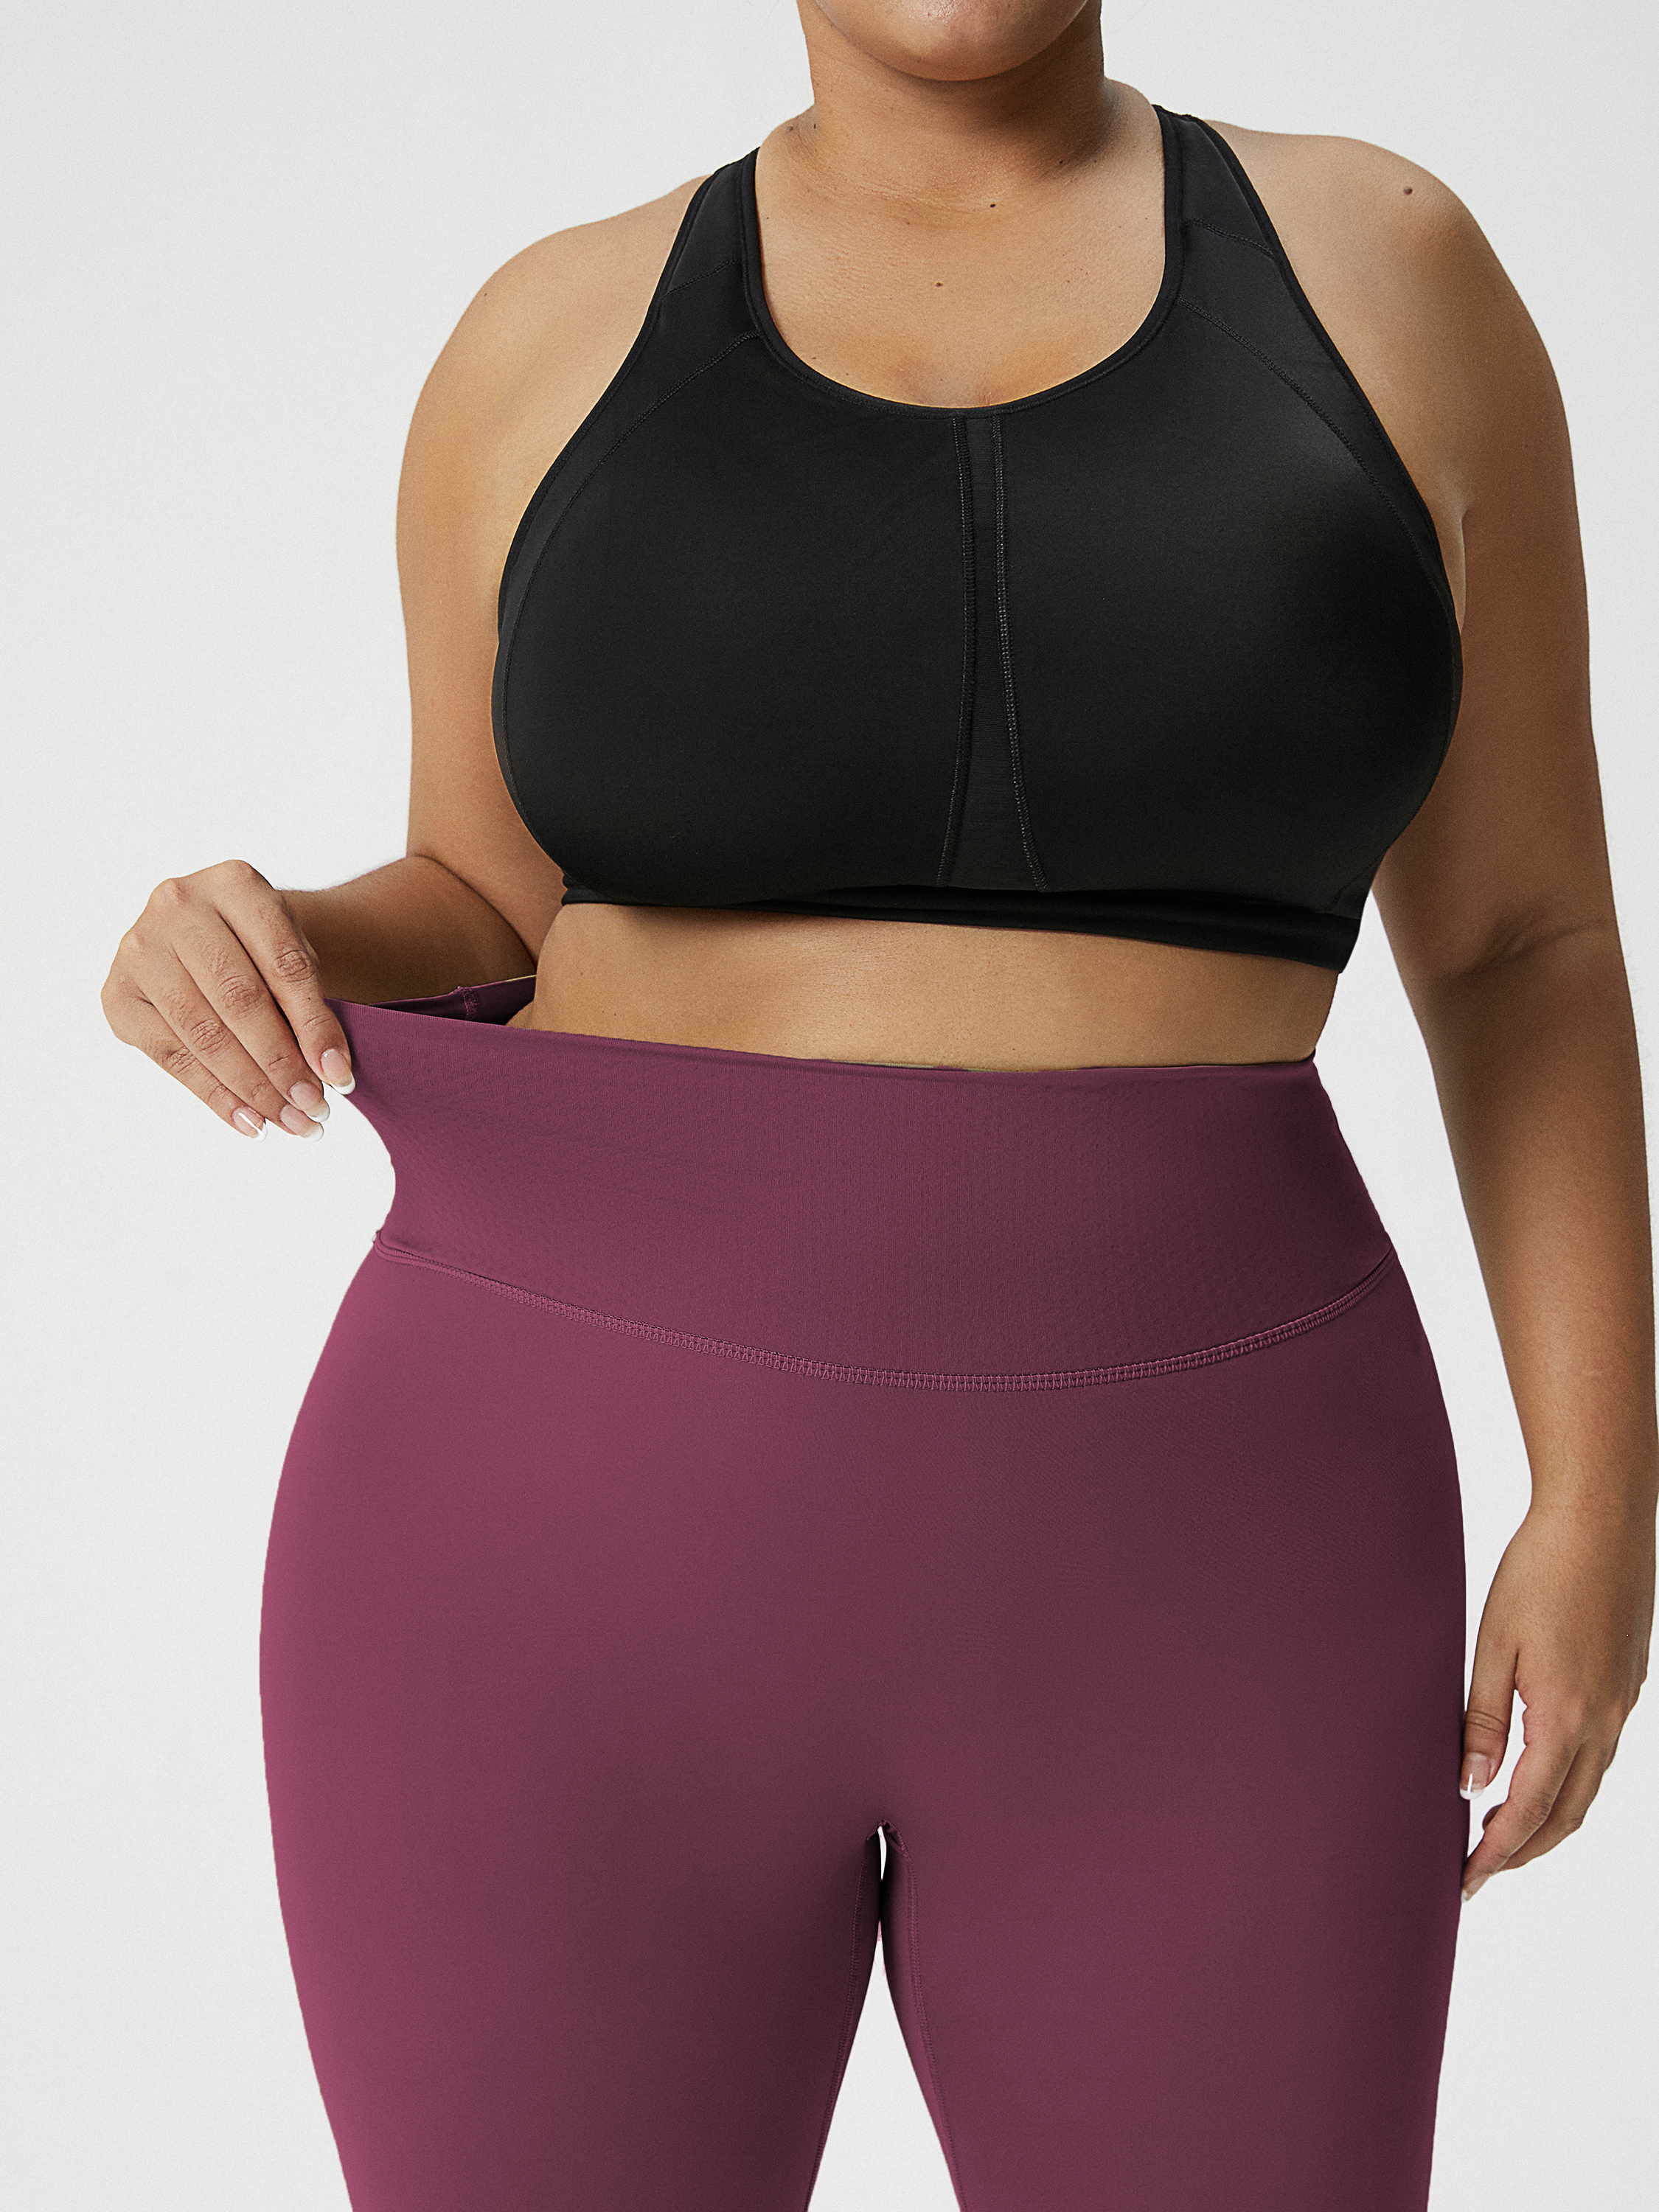 Camel Toe Free High Waisted Legging With Pockets